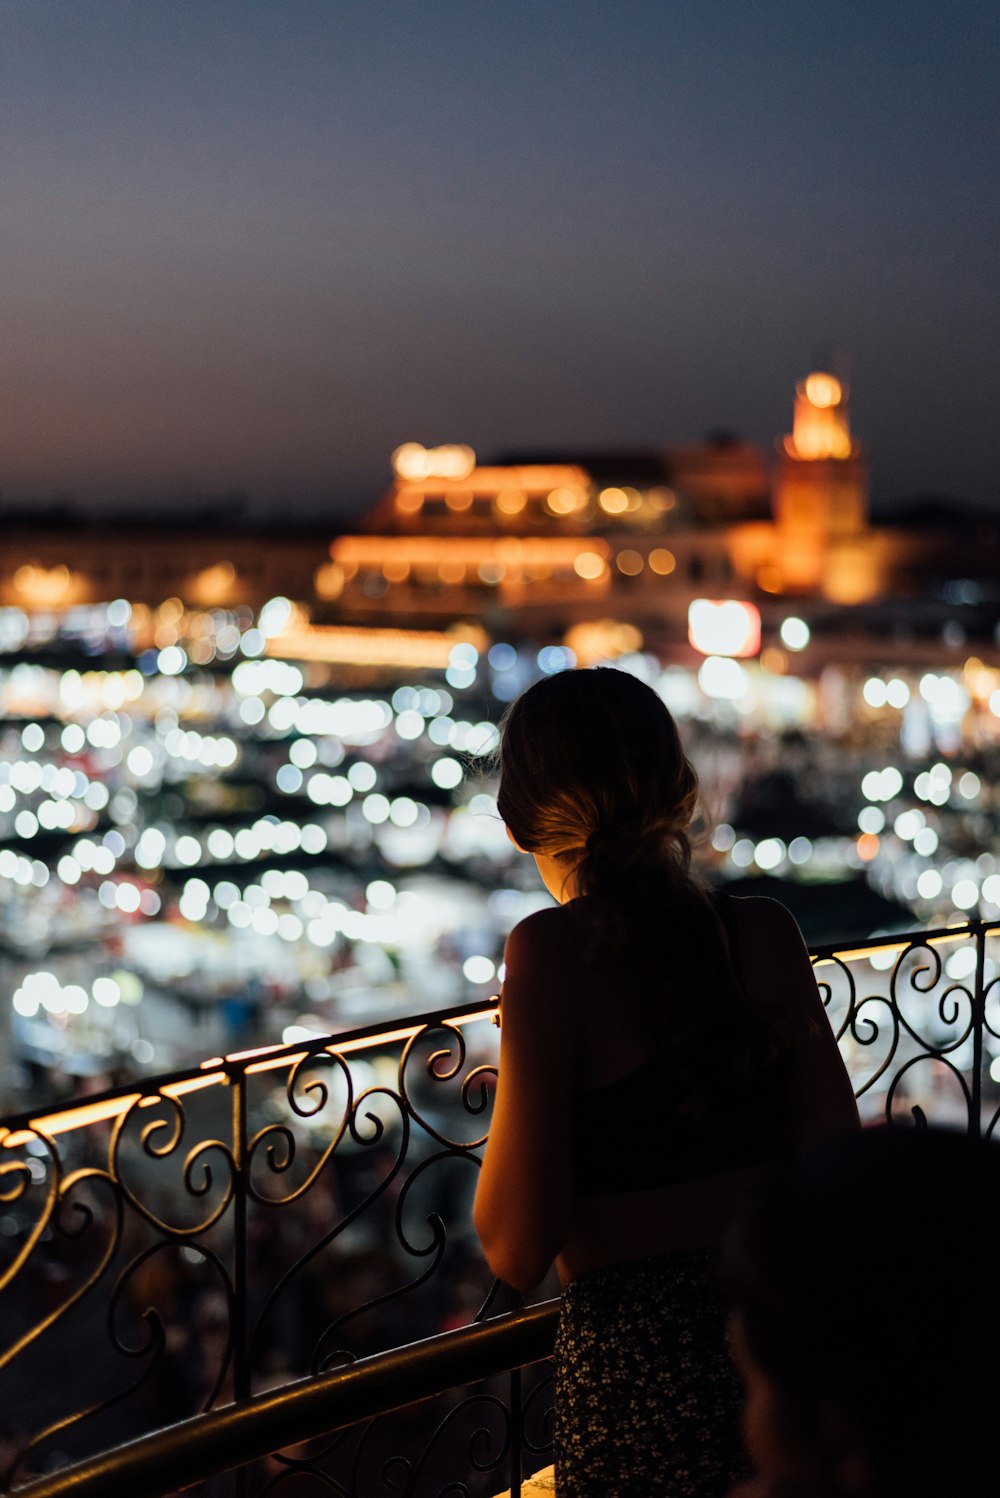 a woman looking out over a city at night